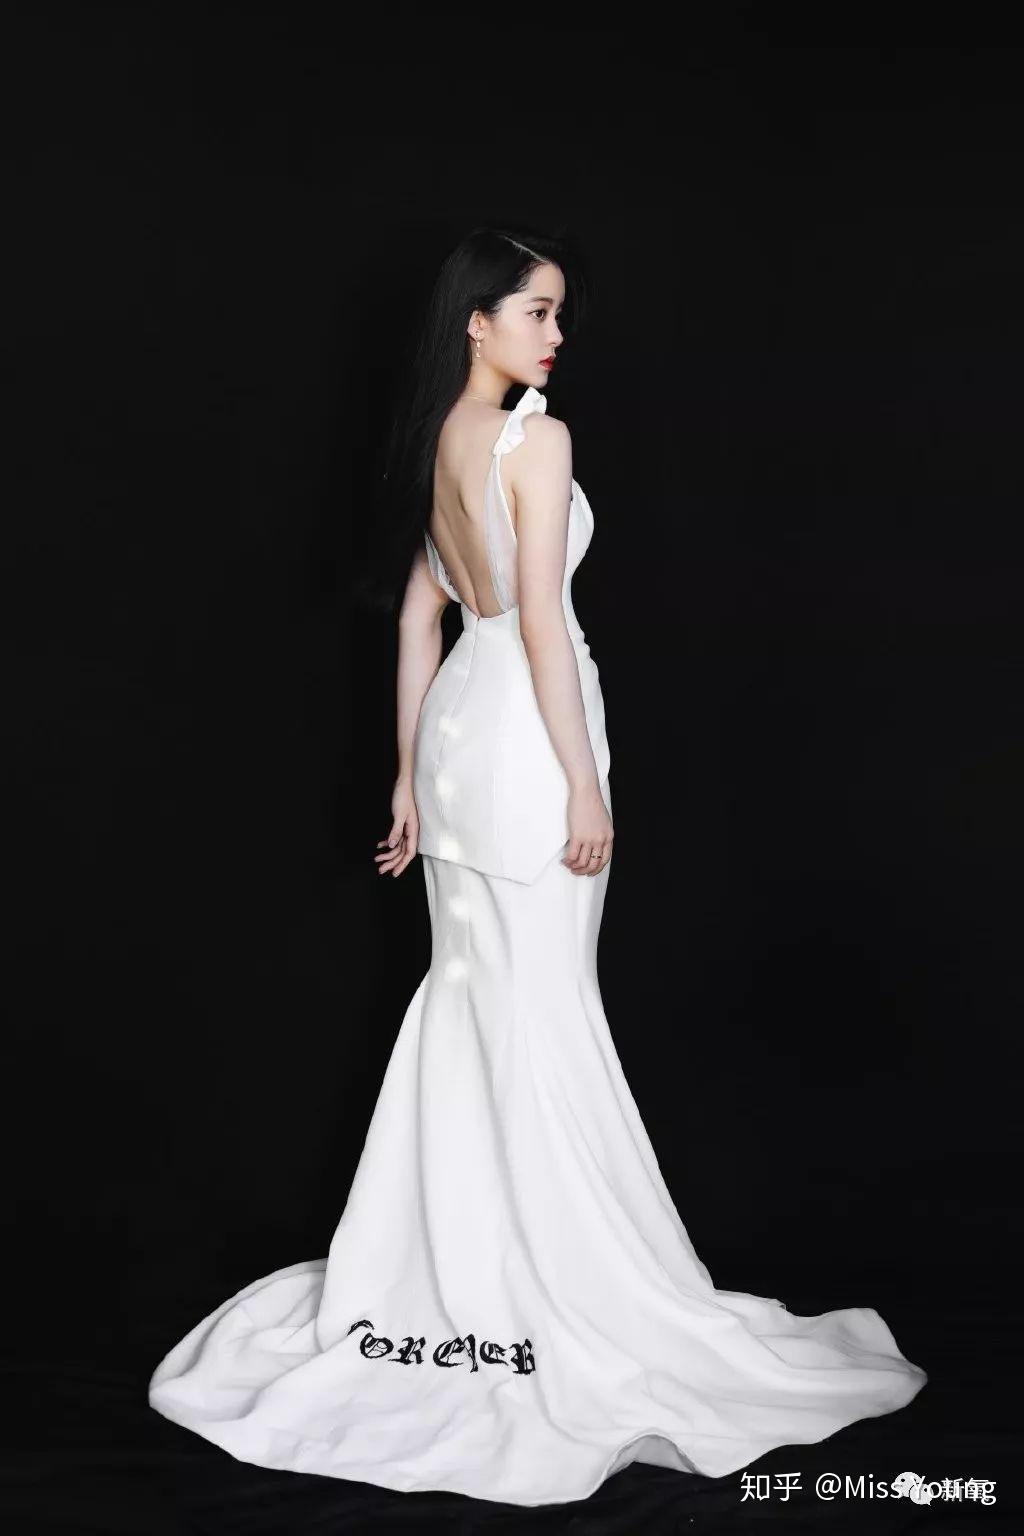 Vera Wang On Her Wedding Gowns, Inspirations and Success | Bridal Bulletin